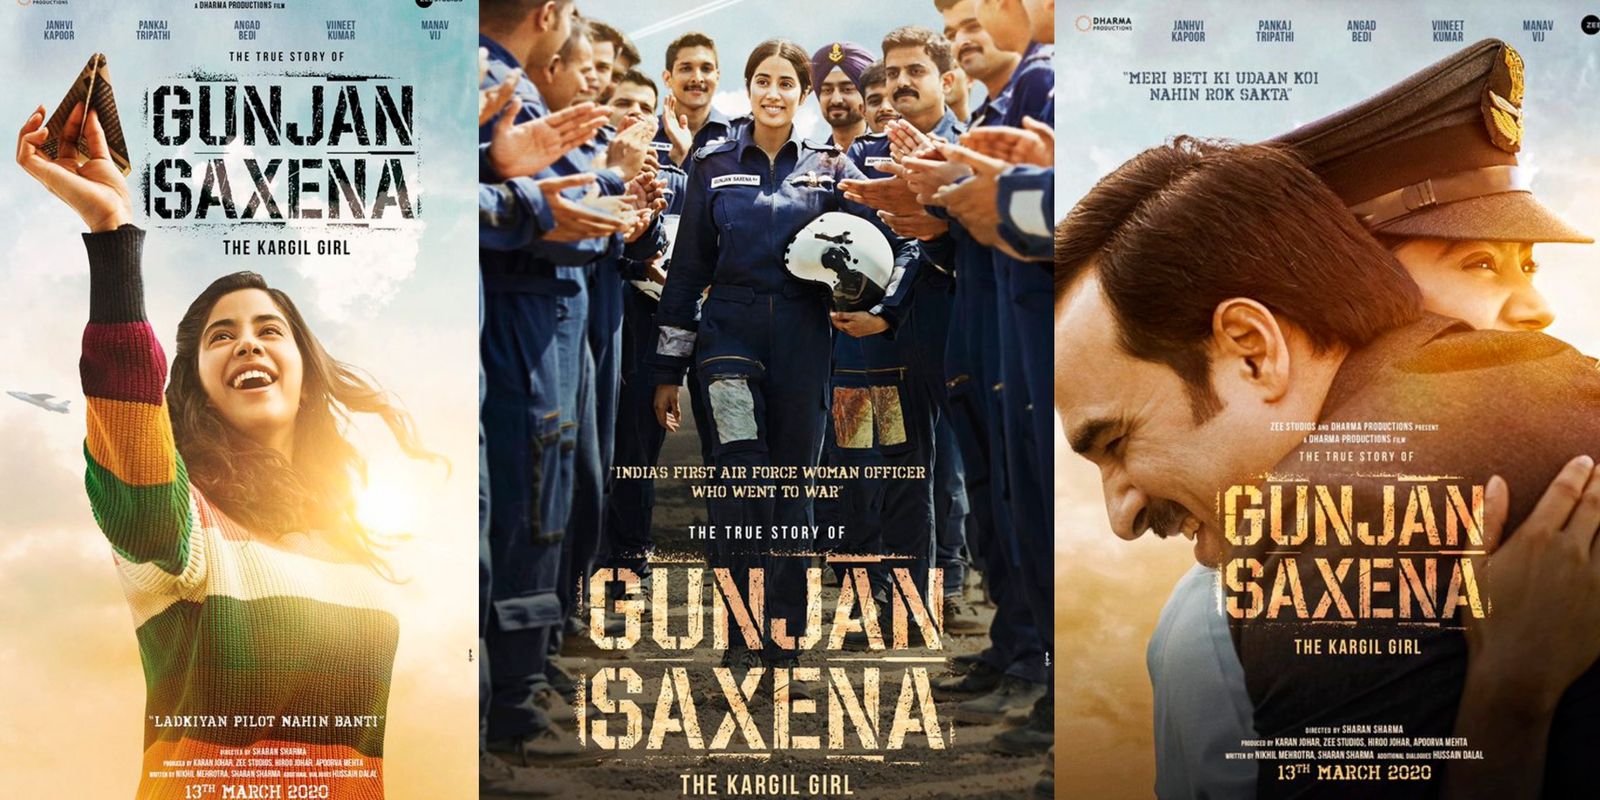 Janhvi Kapoor’s Look From Gunjan Saxena: The Kargil Girl Is Here! Check Out The Posters...